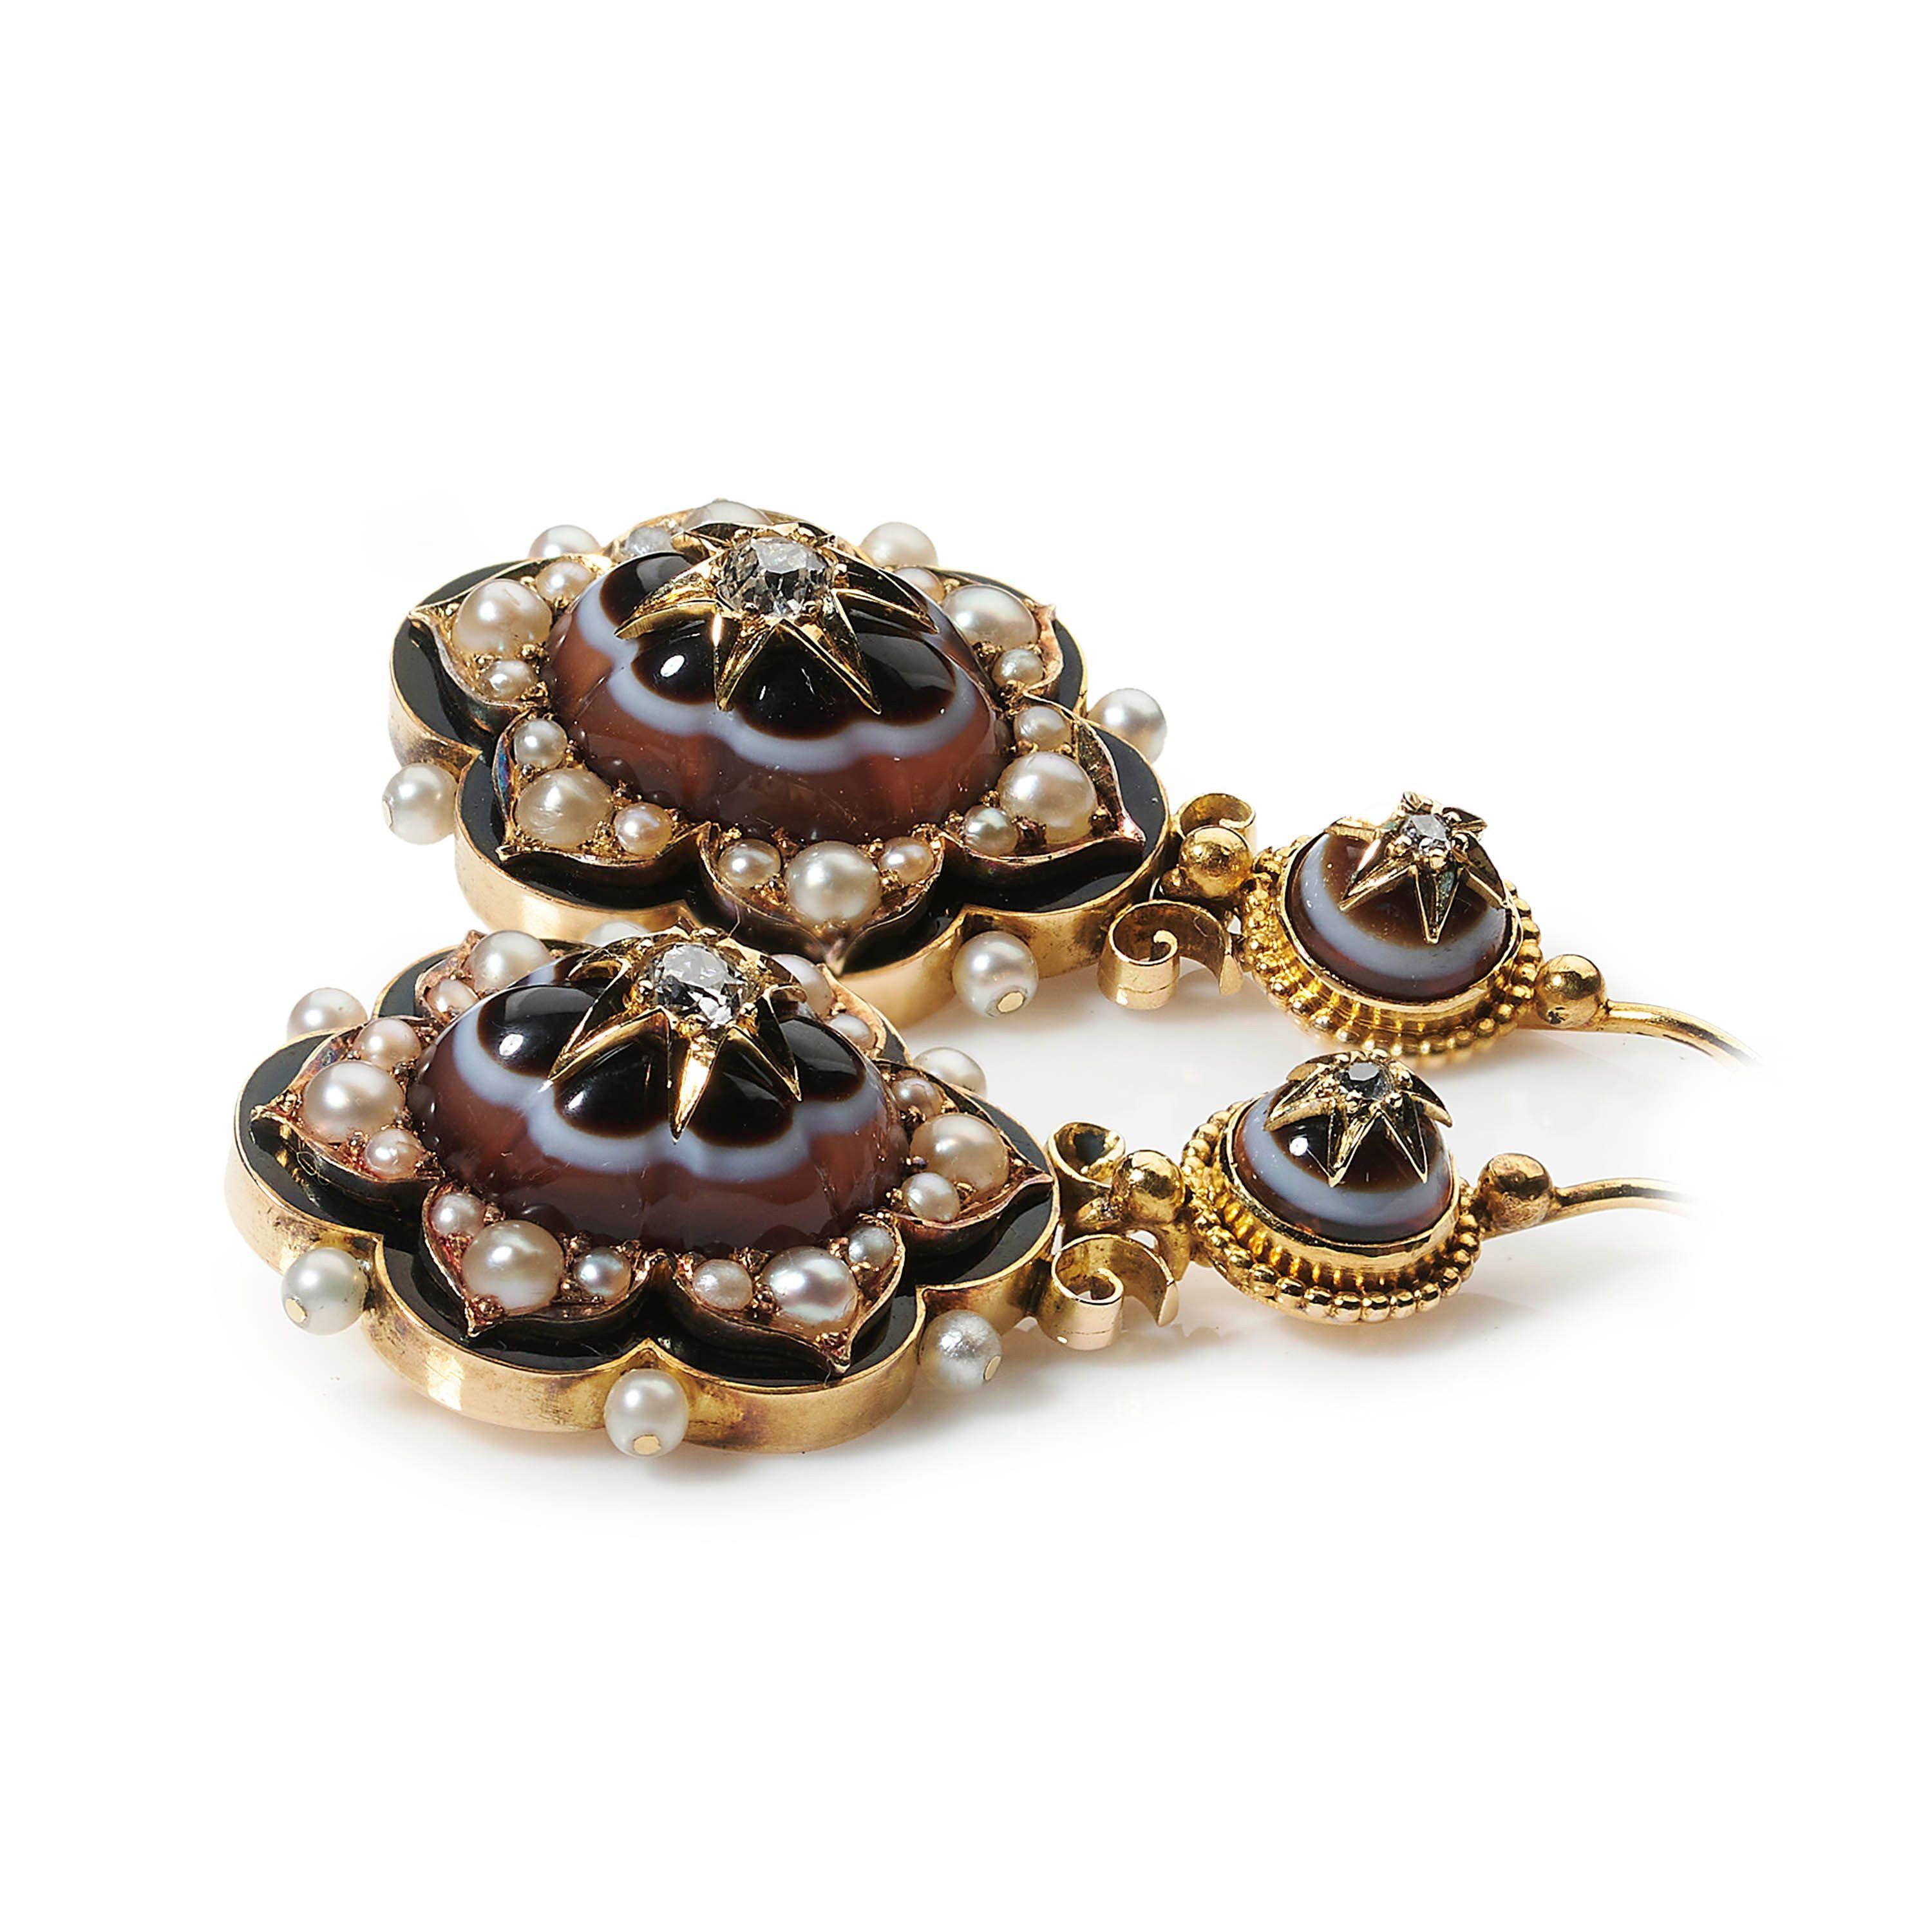 A pair of Victorian banded agate, natural pearl, diamond, enamel and gold drop earrings, with old-cut diamonds in the centre of the pendants, on gold star settings, on carved, fluted banded agate, surrounded by groups of three natural half seed